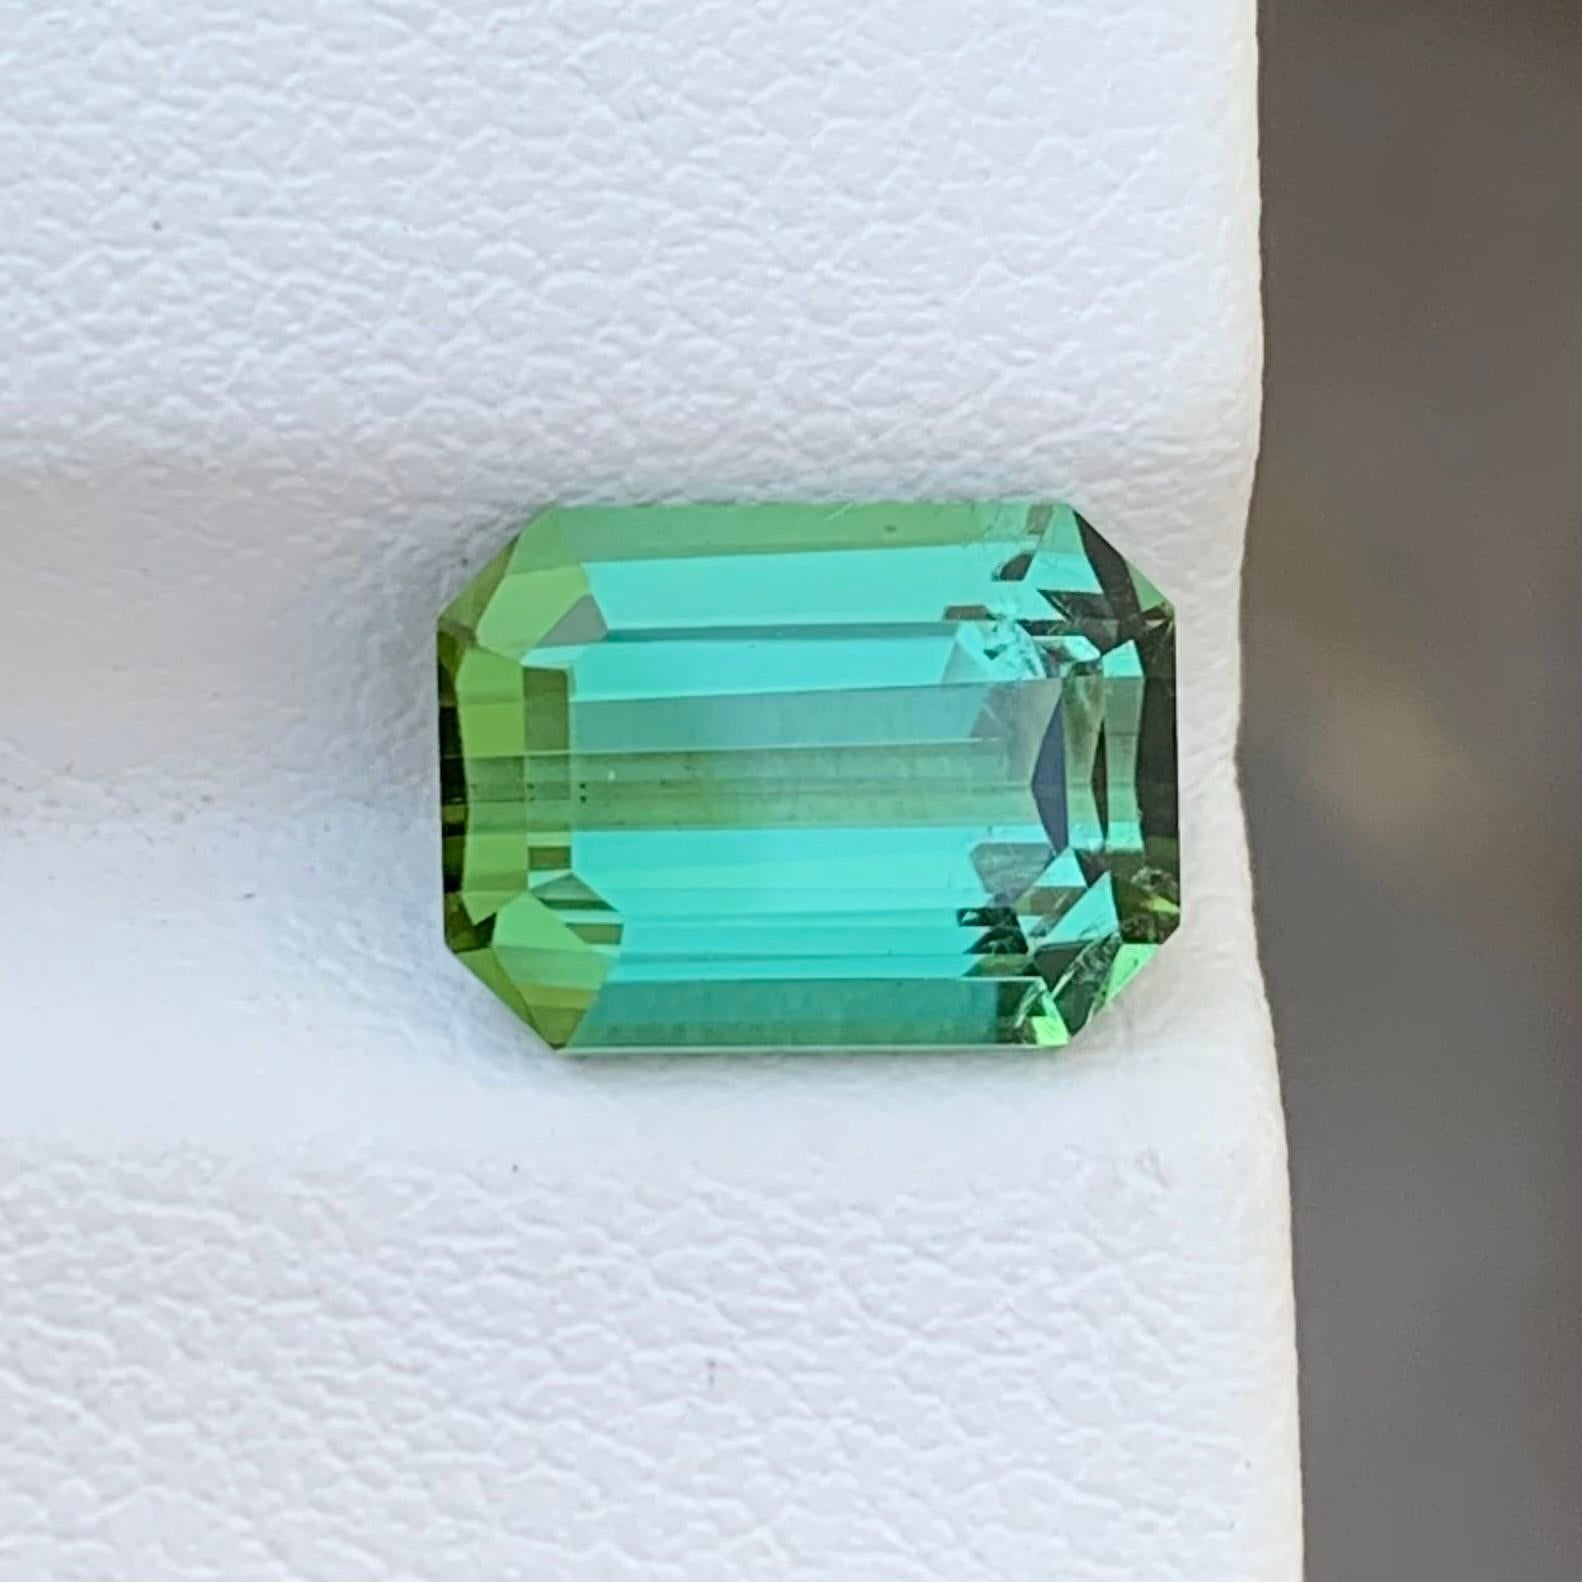 Loose Mint Tourmaline
Weight: 2.85 Carats
Dimension: 9.5 x 7 x 5 Mm
Colour: Mint Green
Origin: Afghanistan
Treatment: Non
Certificate: On Demand
Shape: Emerald

Mint tourmaline, a mesmerizing member of the colorful tourmaline family, enchants with